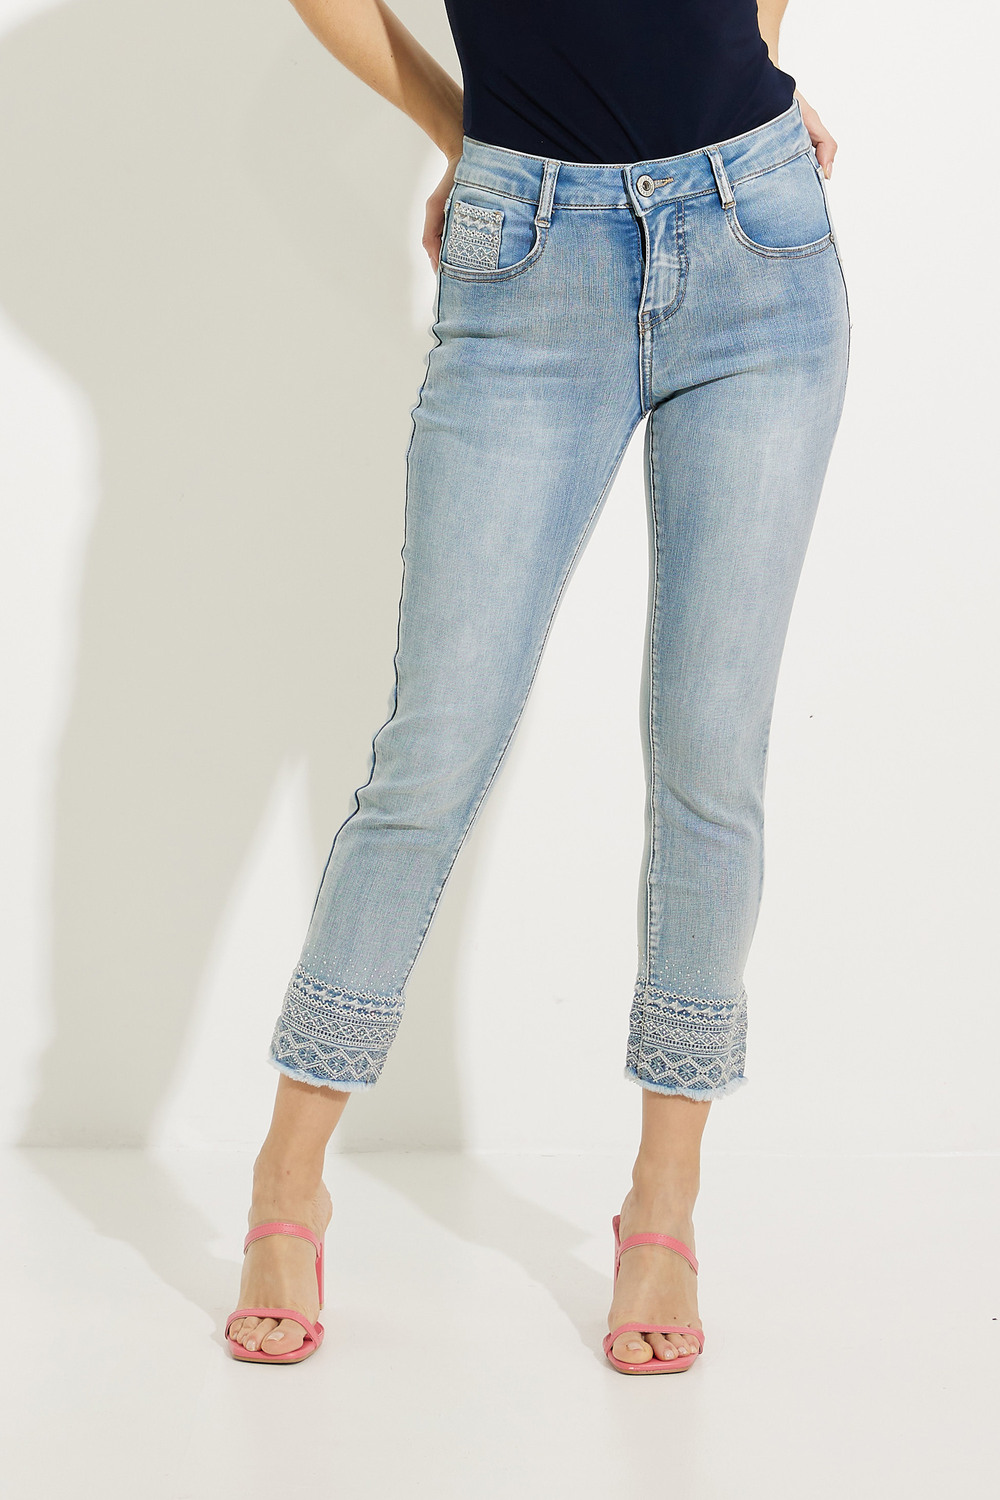 Embroidered Cuff Jeans Style A41223. Blue